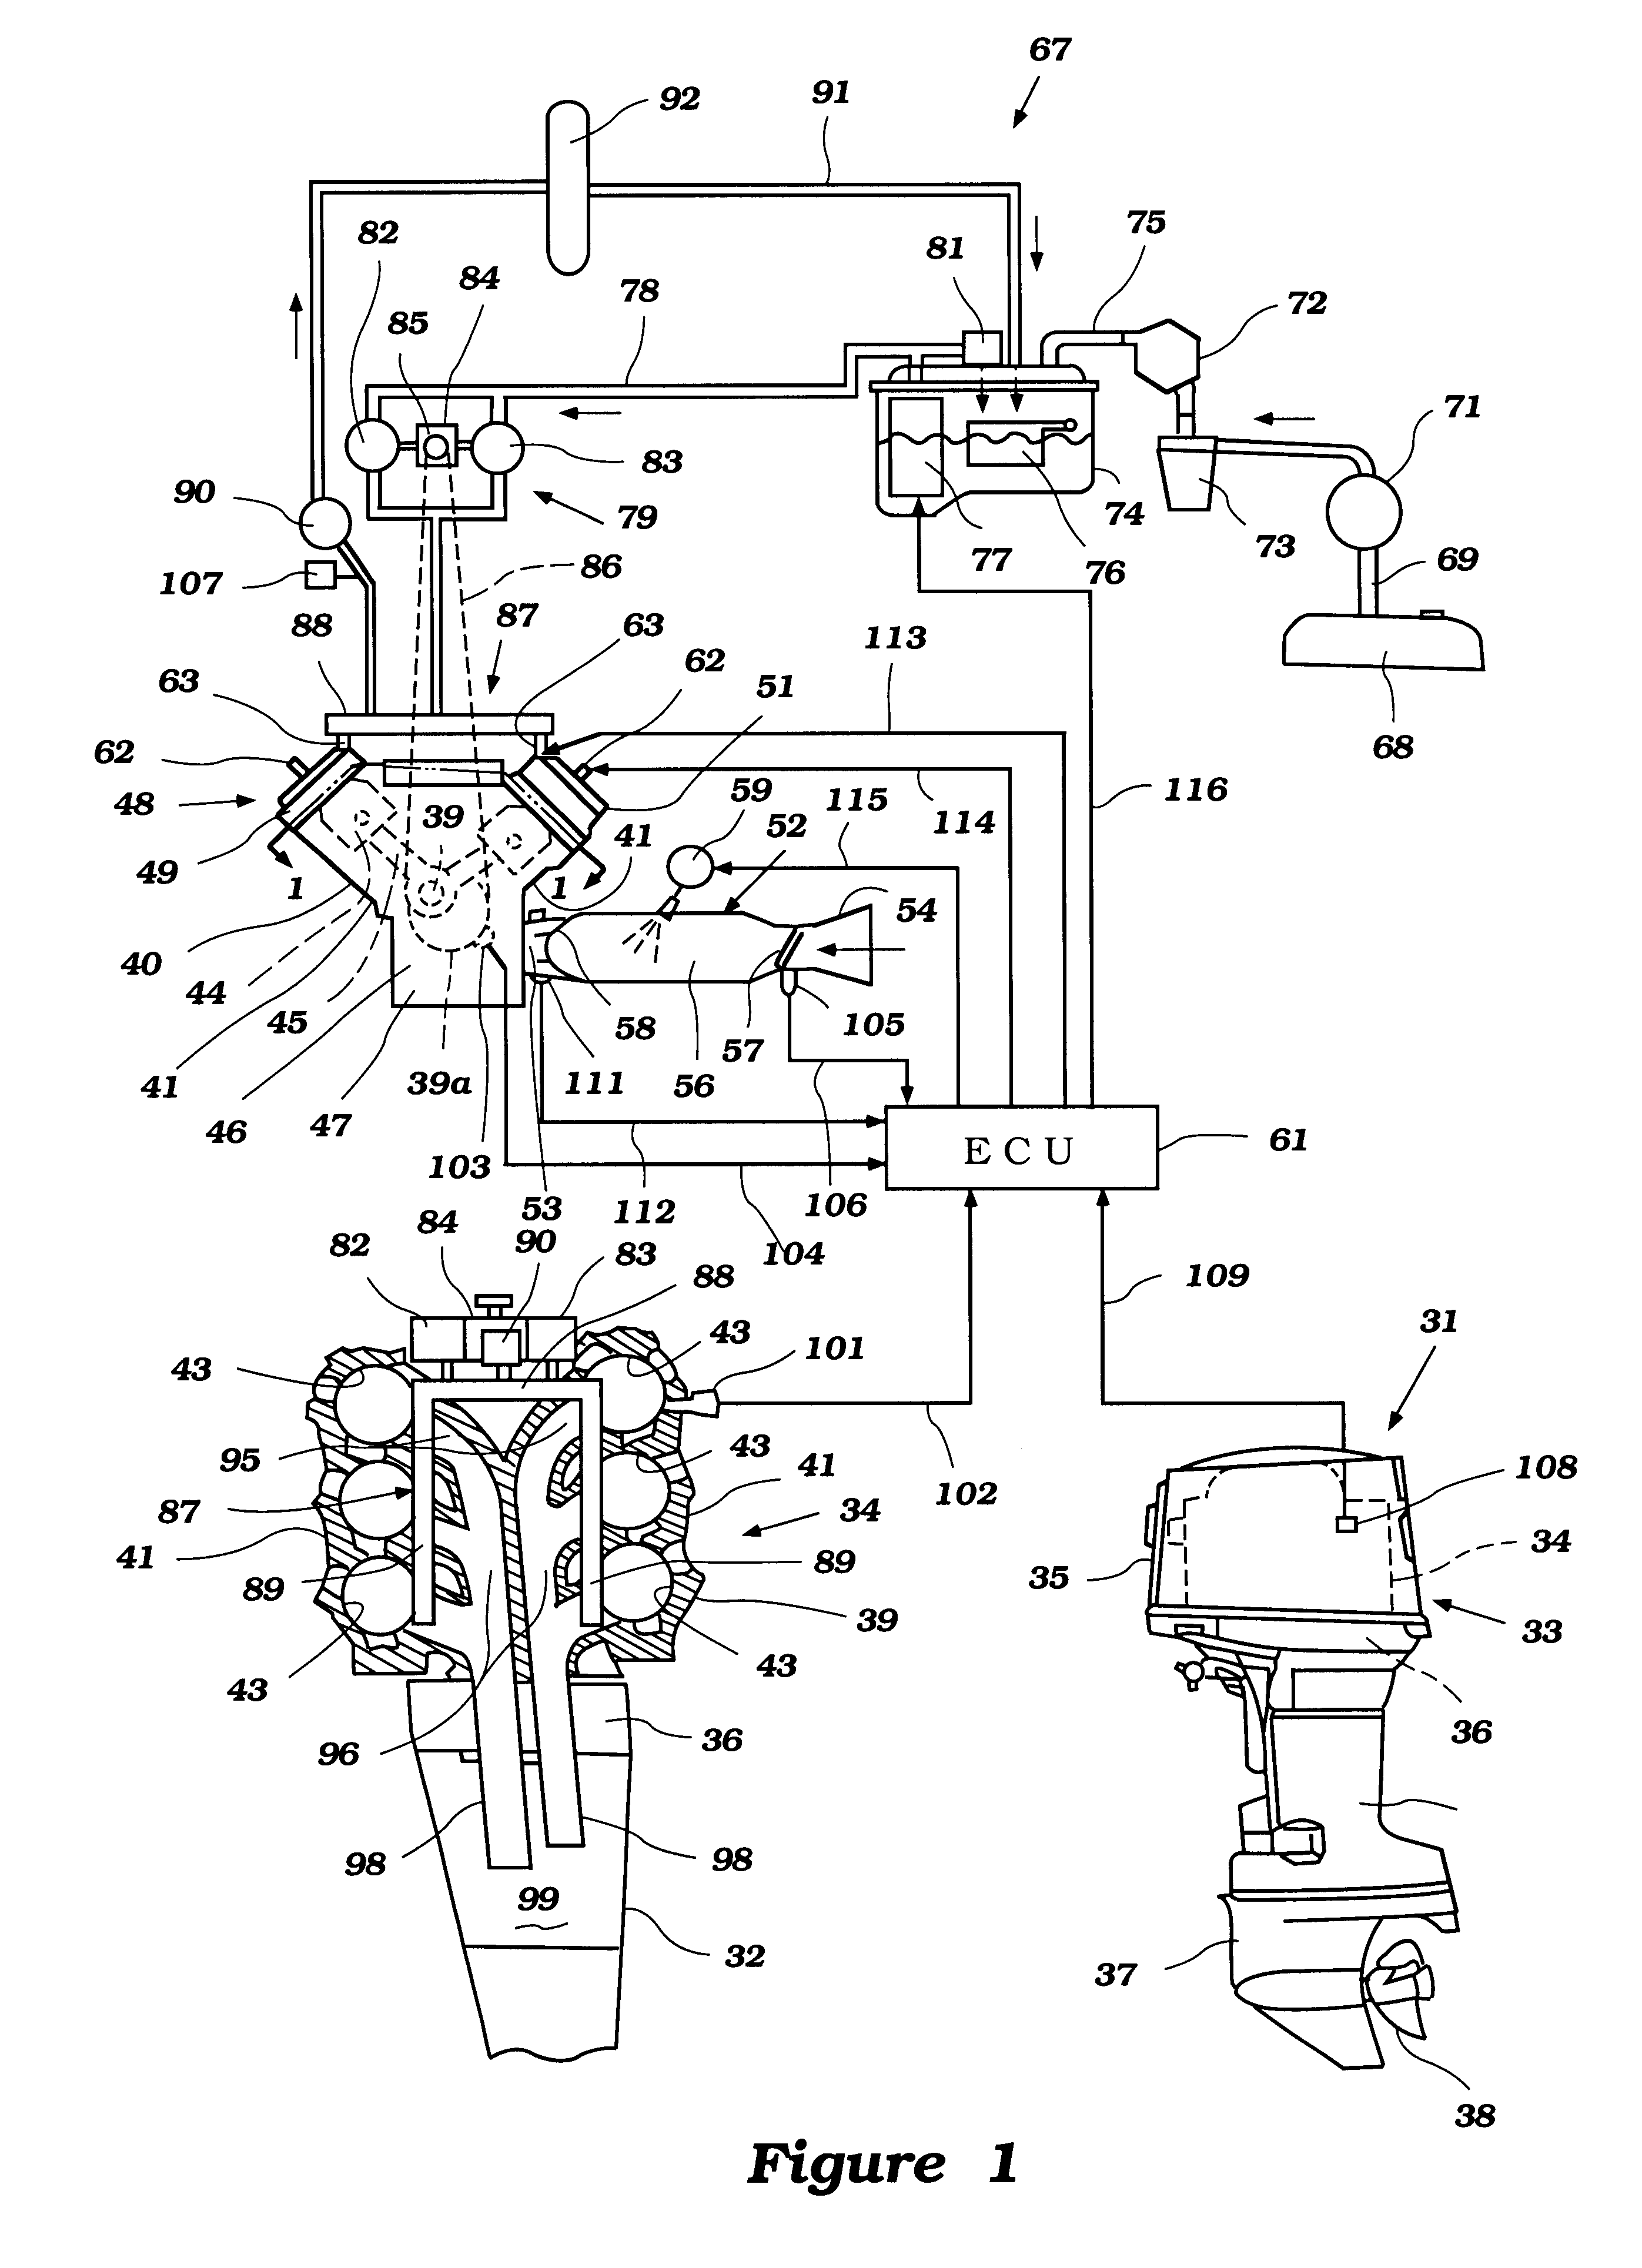 Fuel supply for direct injected engine